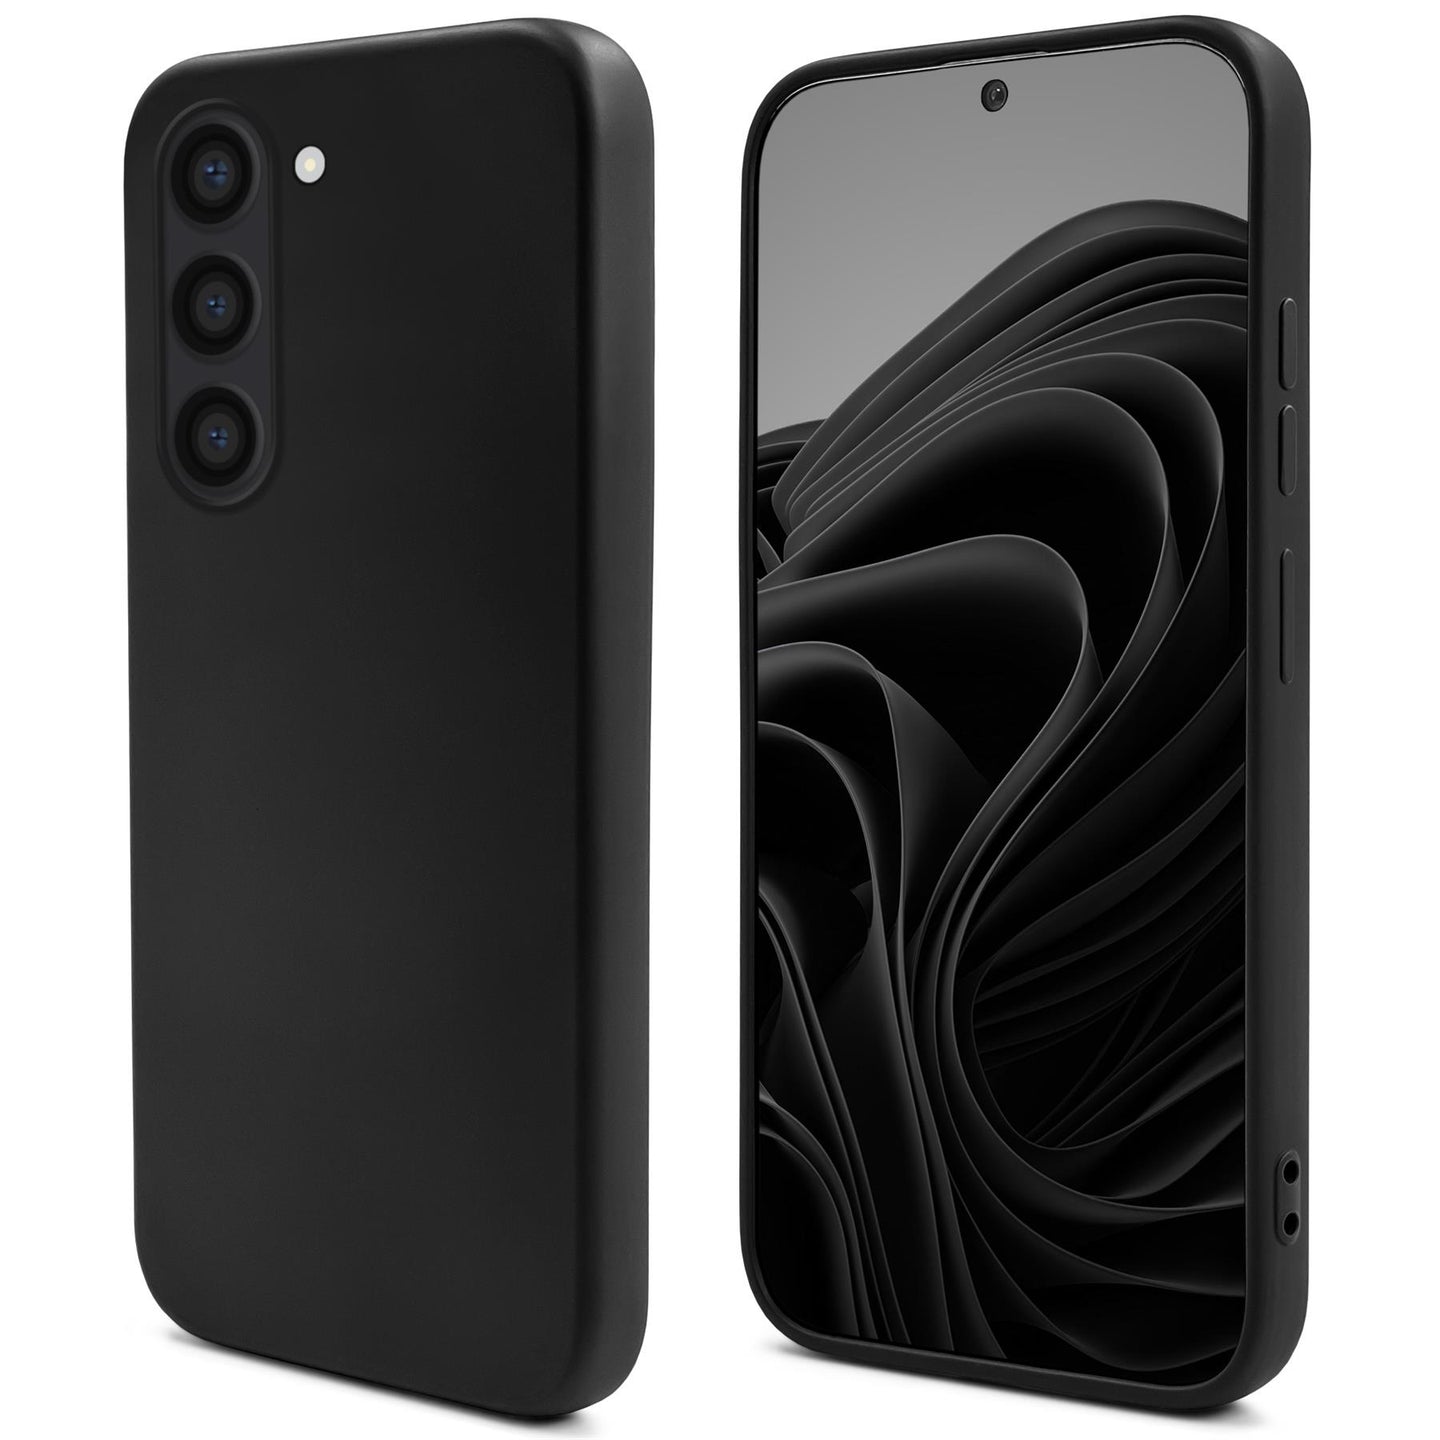 Moozy Lifestyle. Silicone Case for Samsung S23, Black - Liquid Silicone Lightweight Cover with Matte Finish and Soft Microfiber Lining, Premium Silicone Case